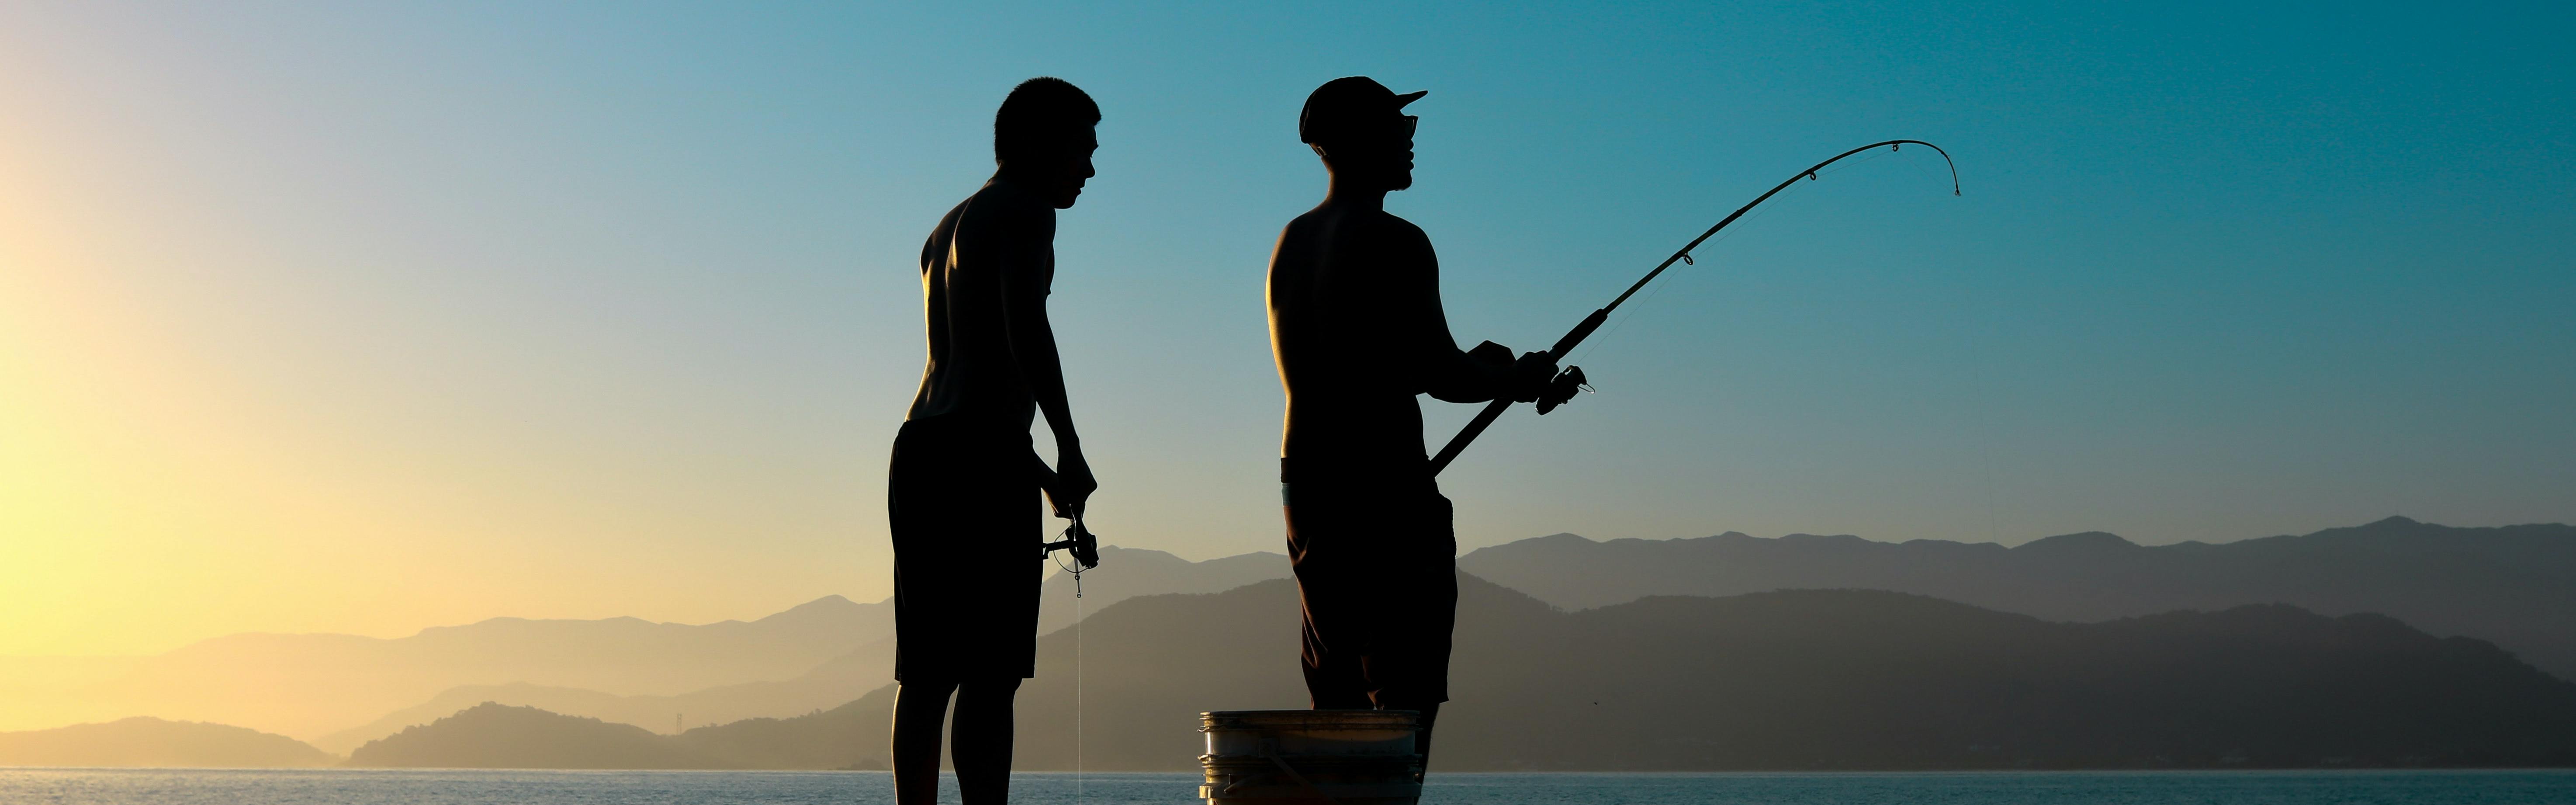 The 13 Best Fishing Rod Brands